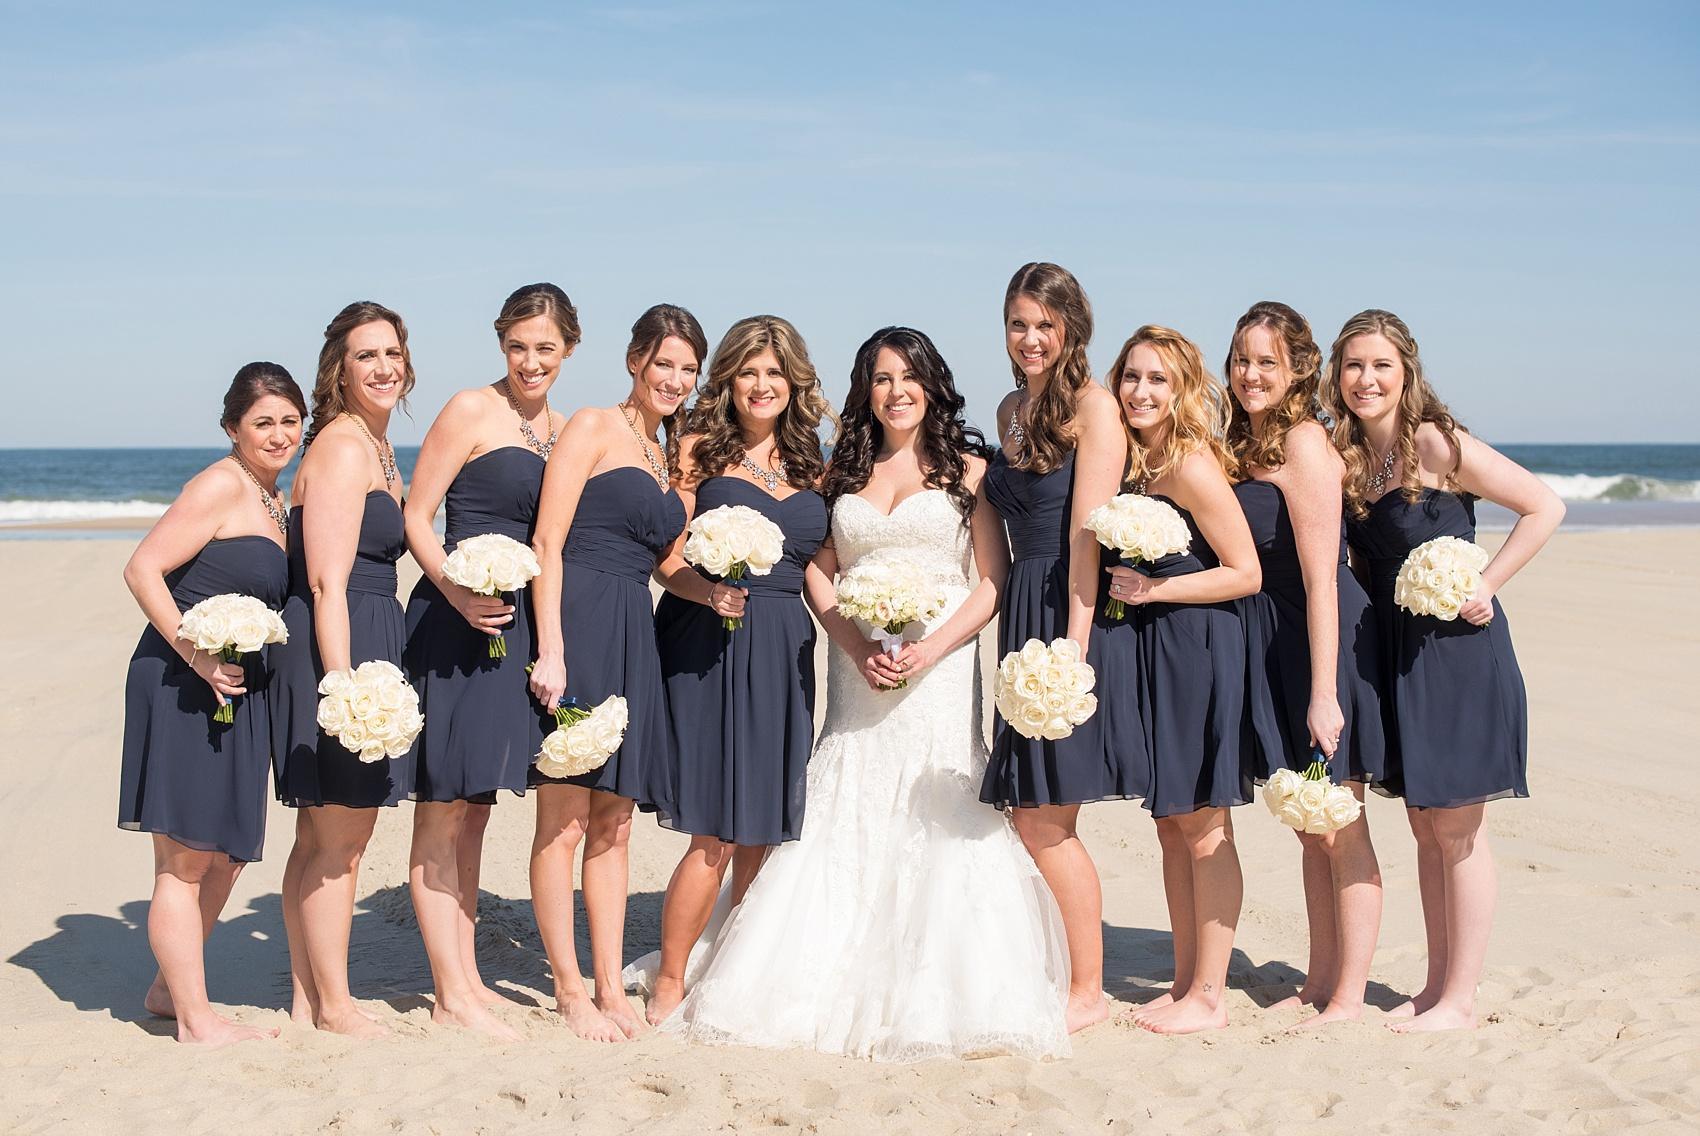 Photo by Mikkel Paige photography. Bridesmaids in navy chiffon short dresses with white rose bouquets.